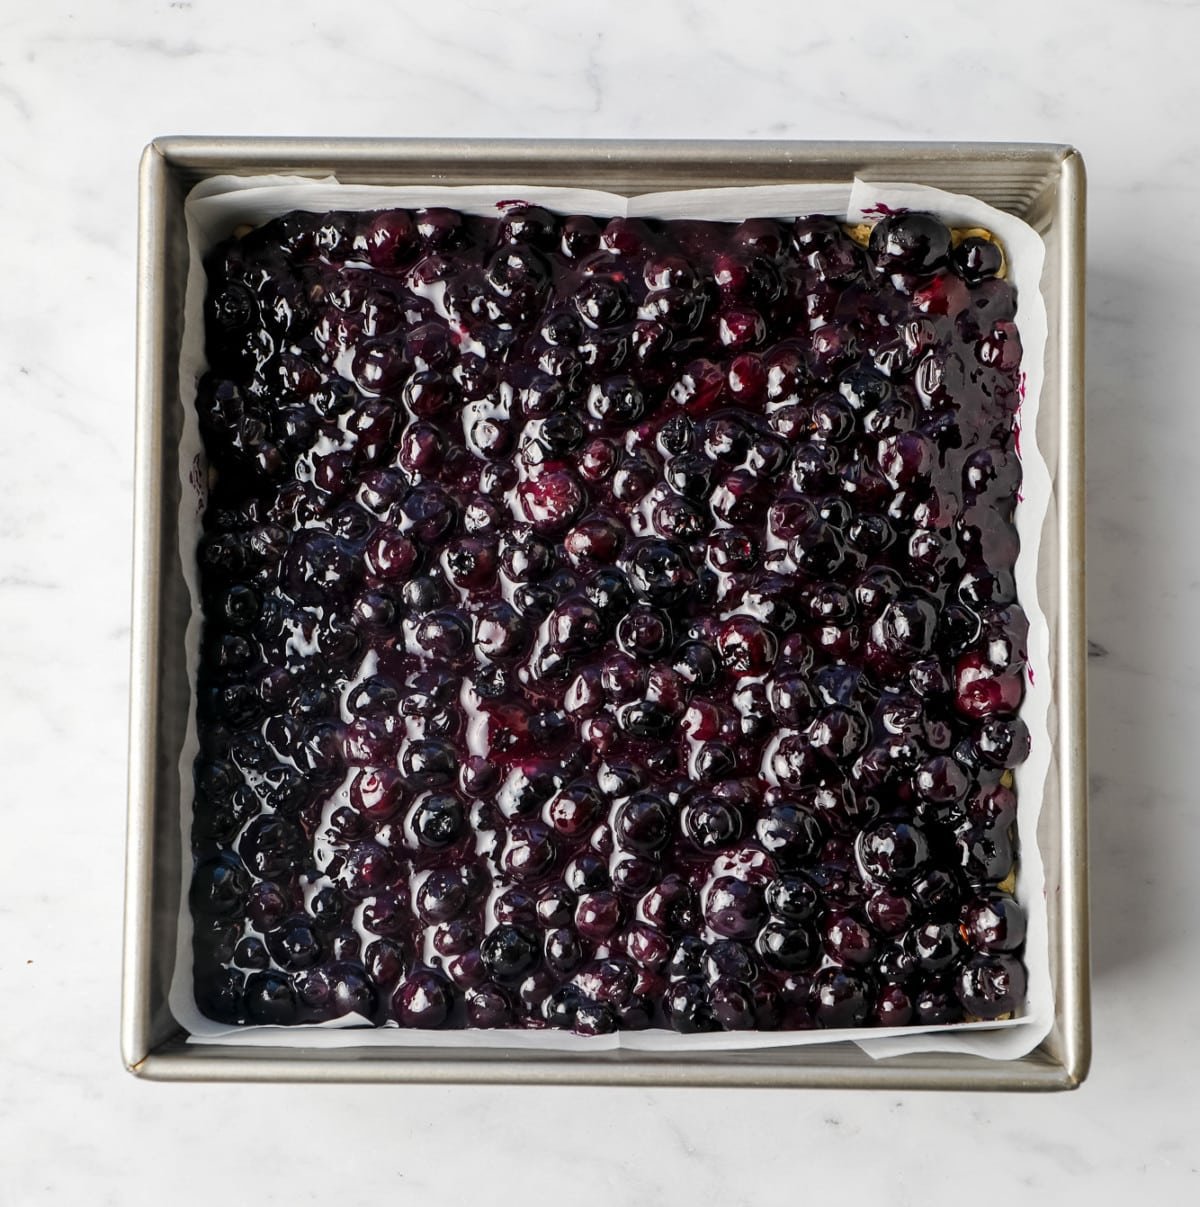 cooked blueberry mixture in a square pan lined with parchment paper